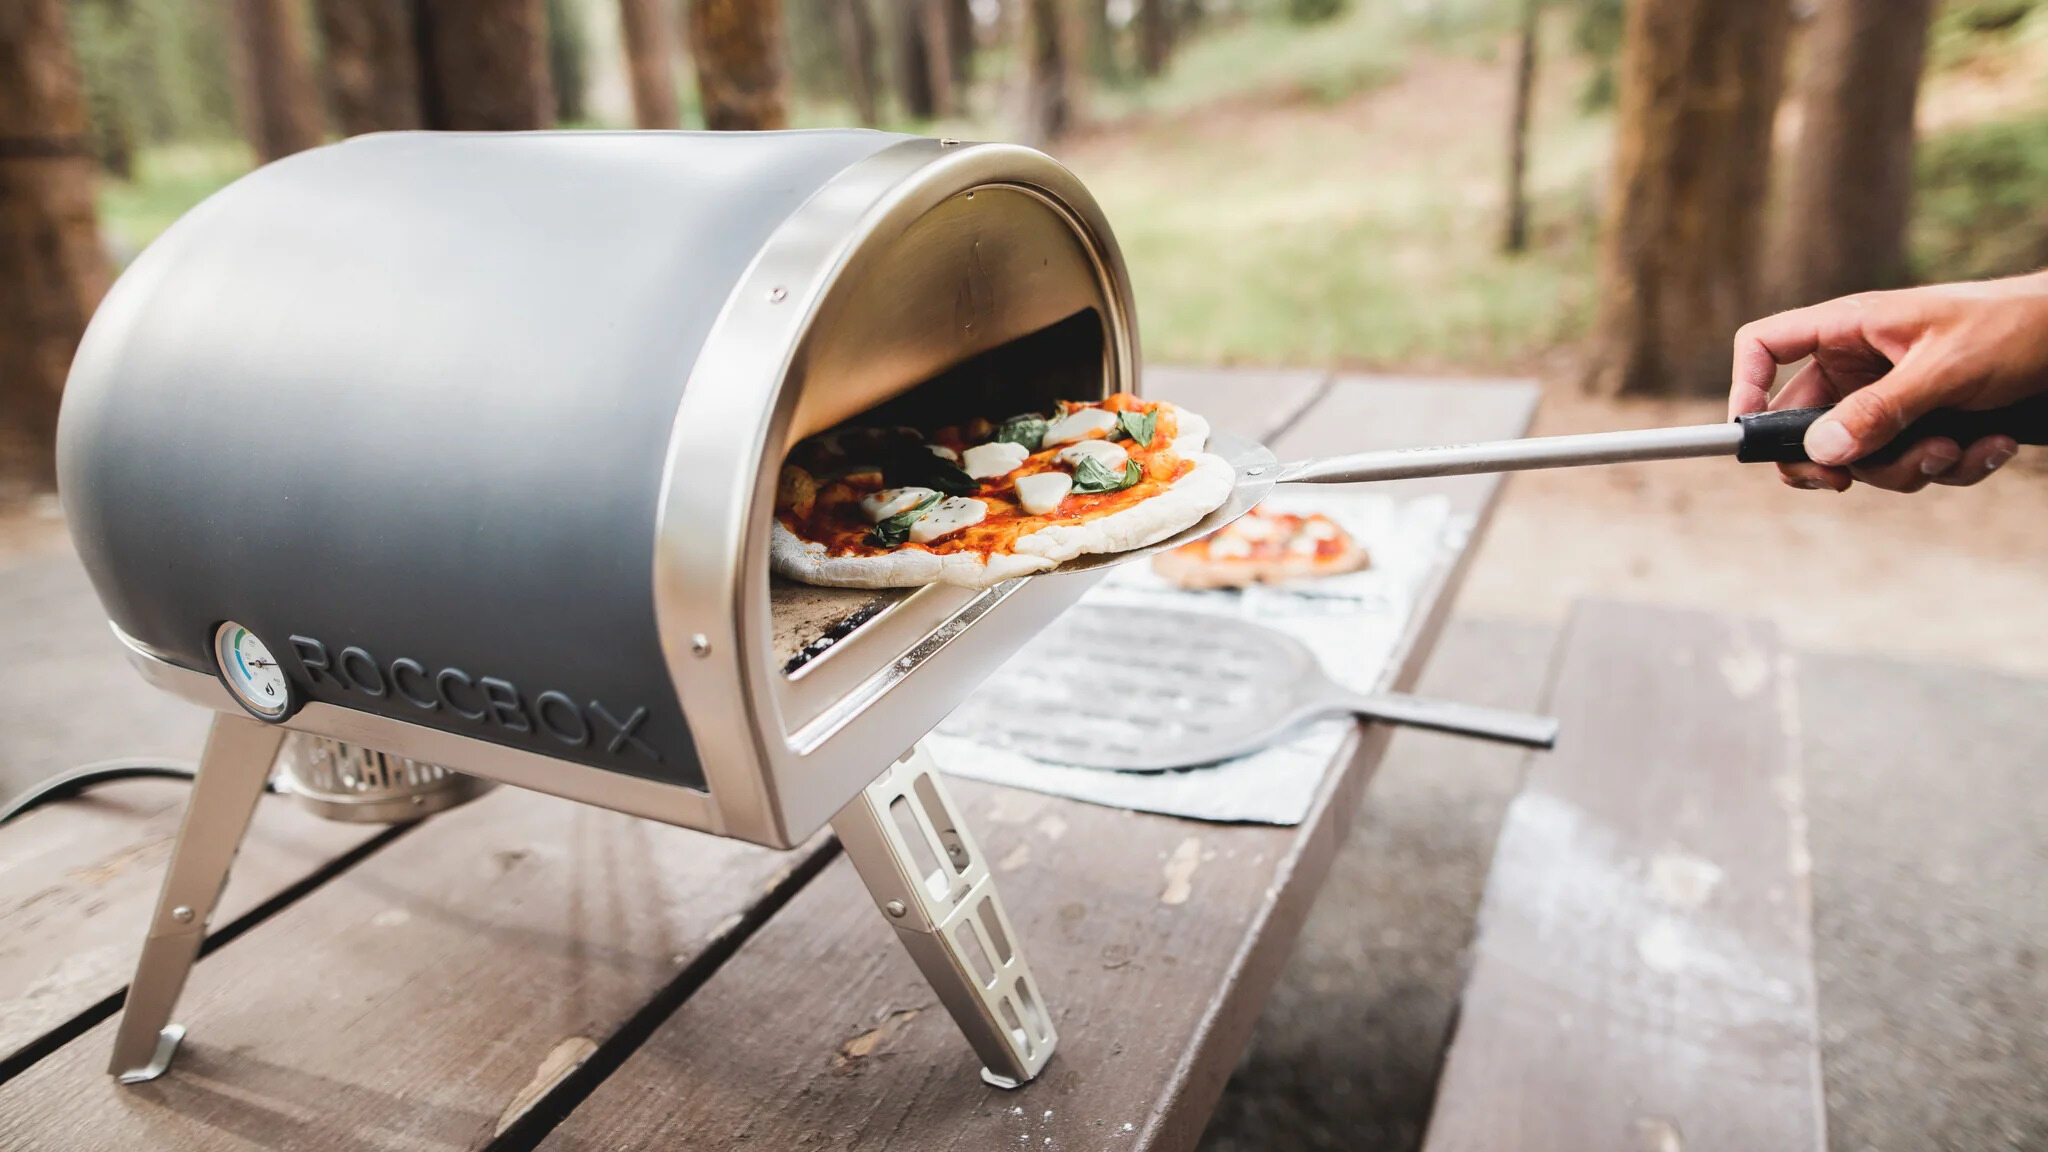 https://storables.com/wp-content/uploads/2023/12/14-best-roccbox-pizza-oven-for-2023-1703167859.jpg